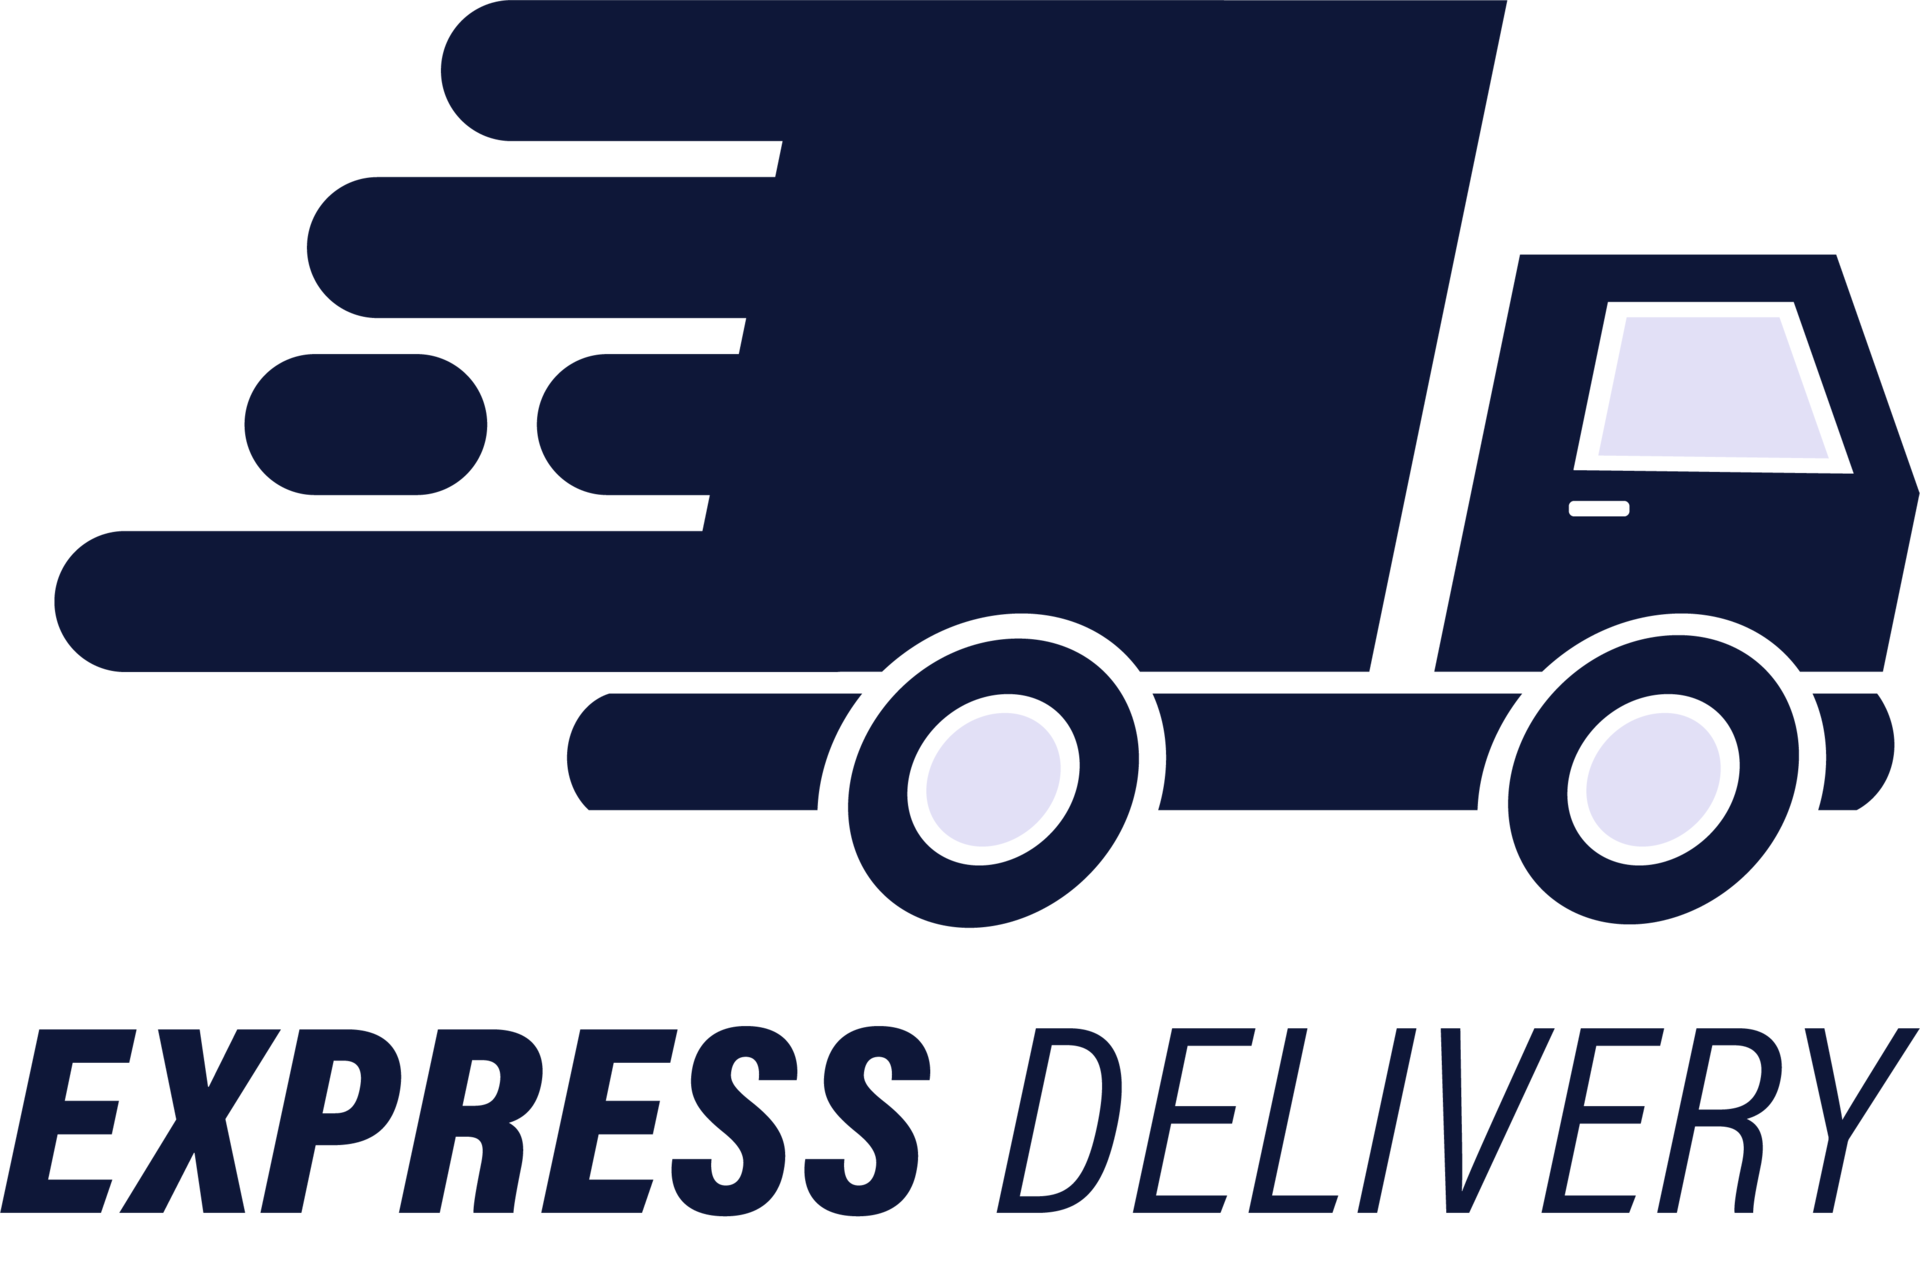 Truck with stop watch express delivery icon for shipping services